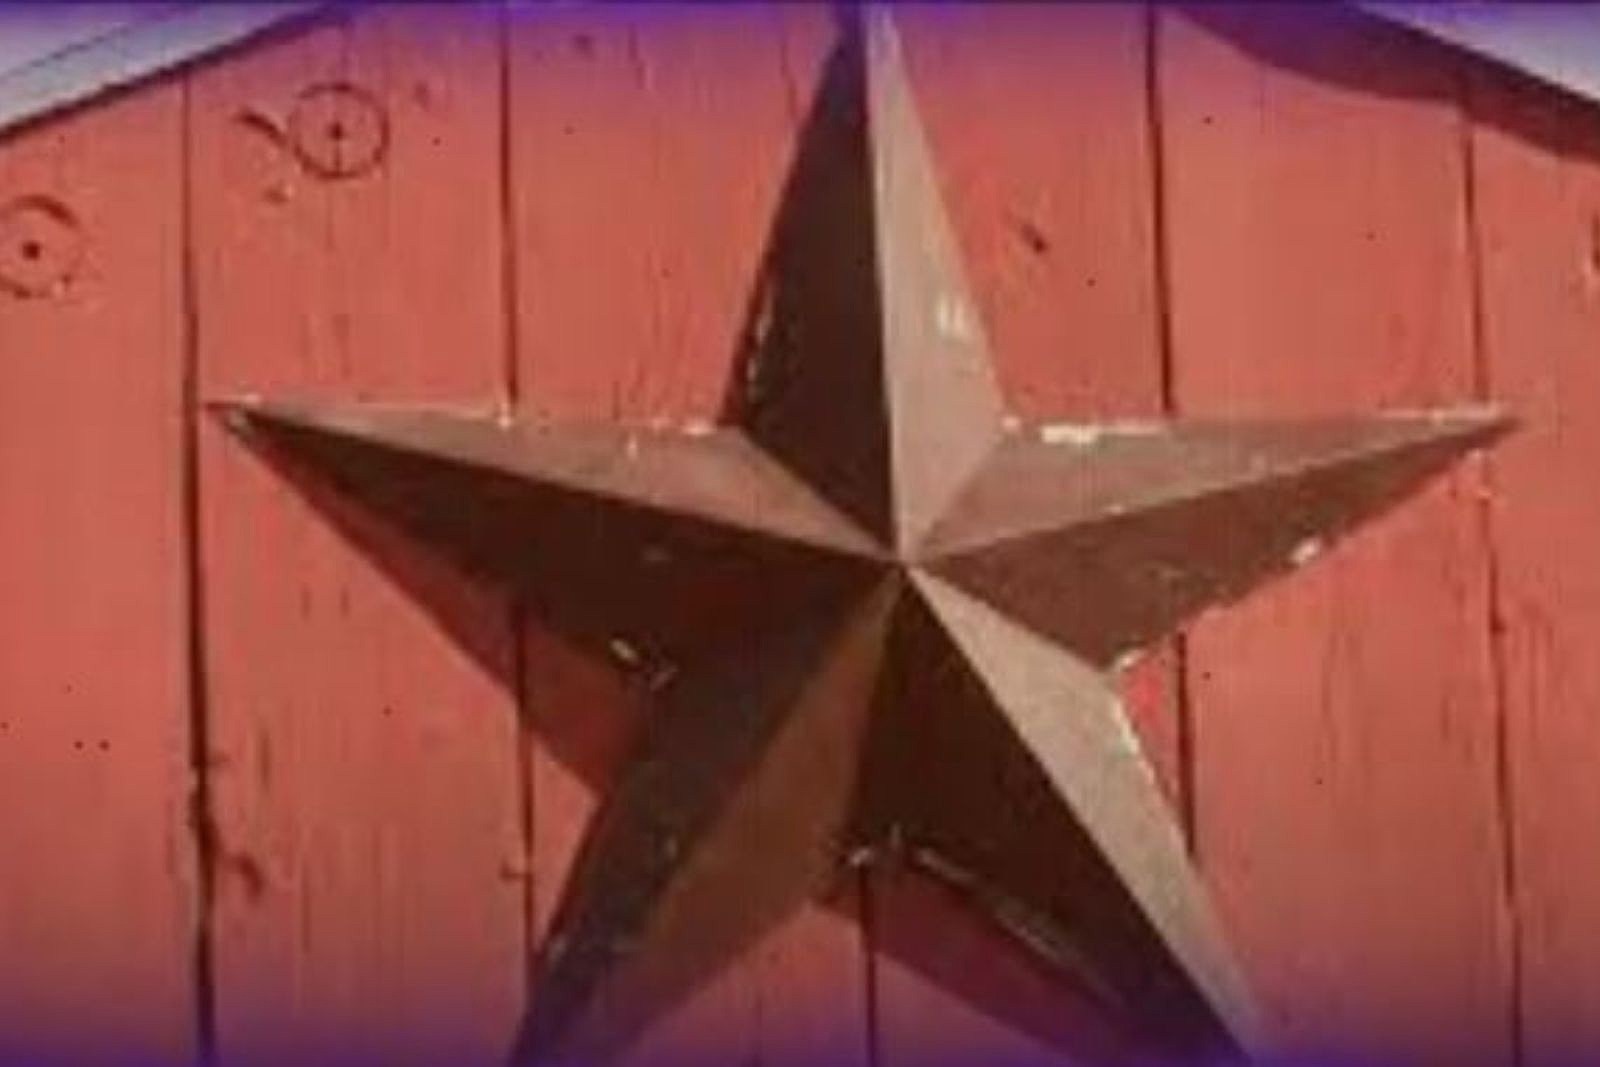 What Do the Giant Stars on Iowa Barns Mean?loading...